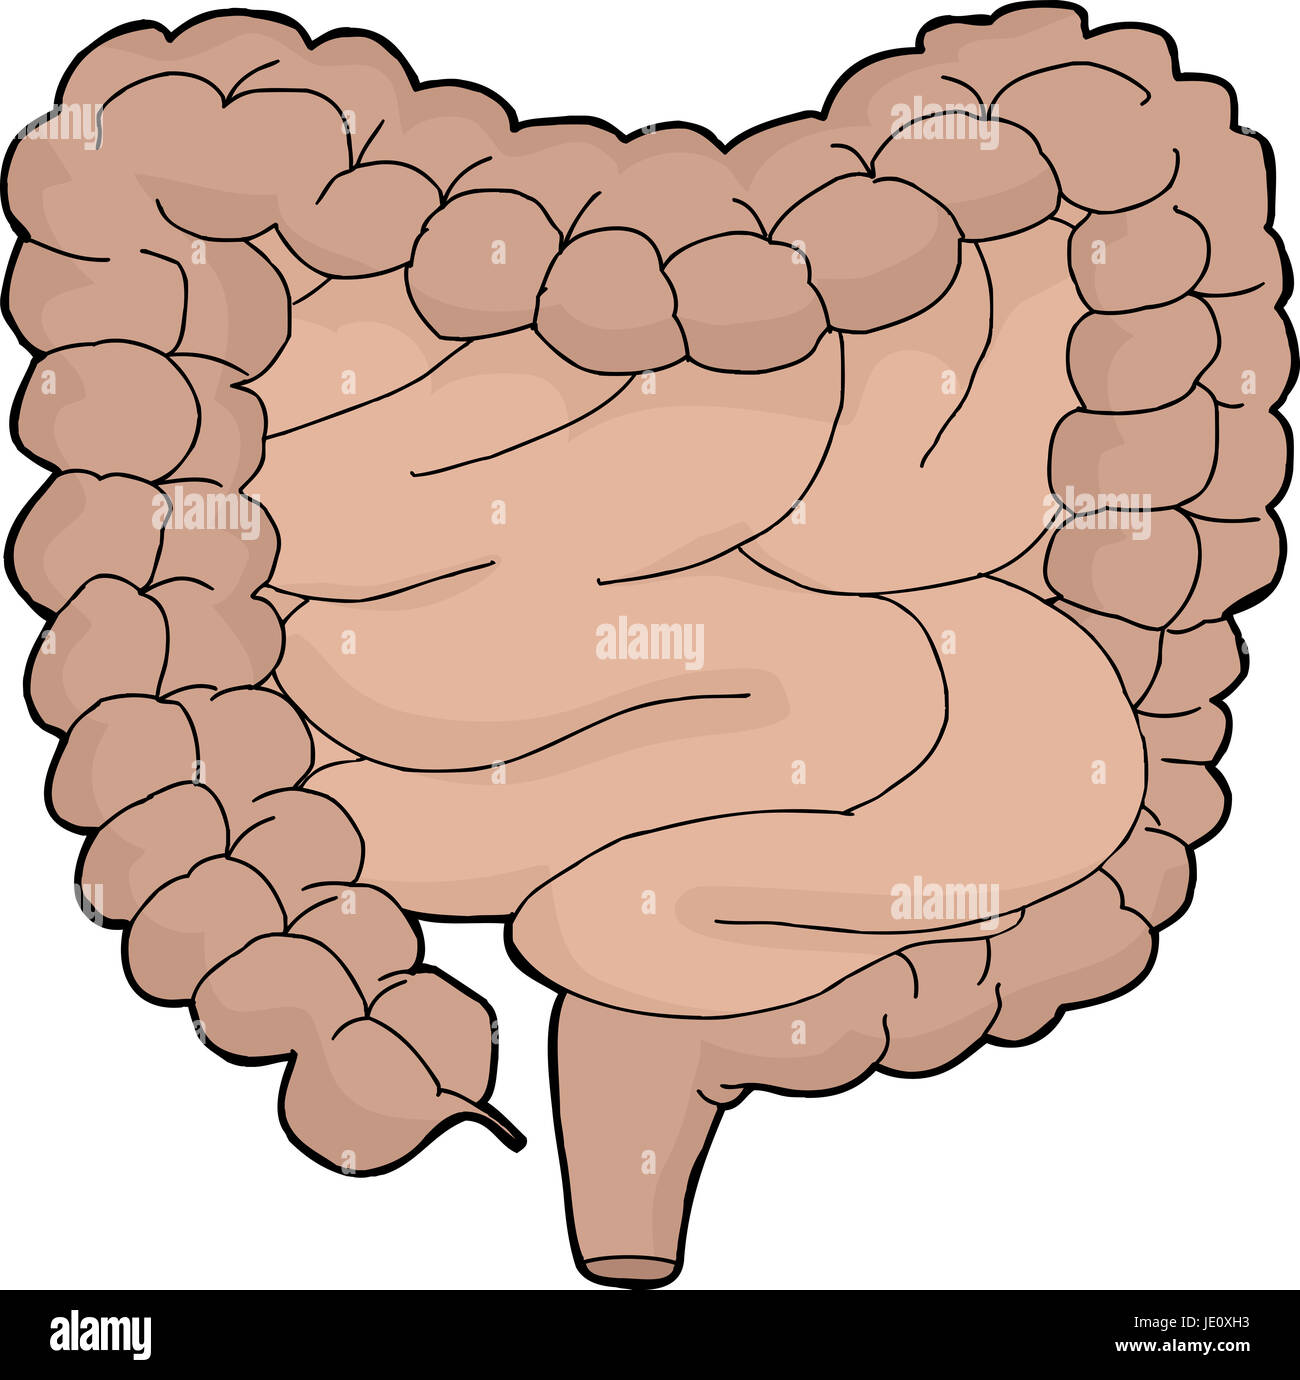 Isolated cartoon human digestive tract over white background Stock Photo